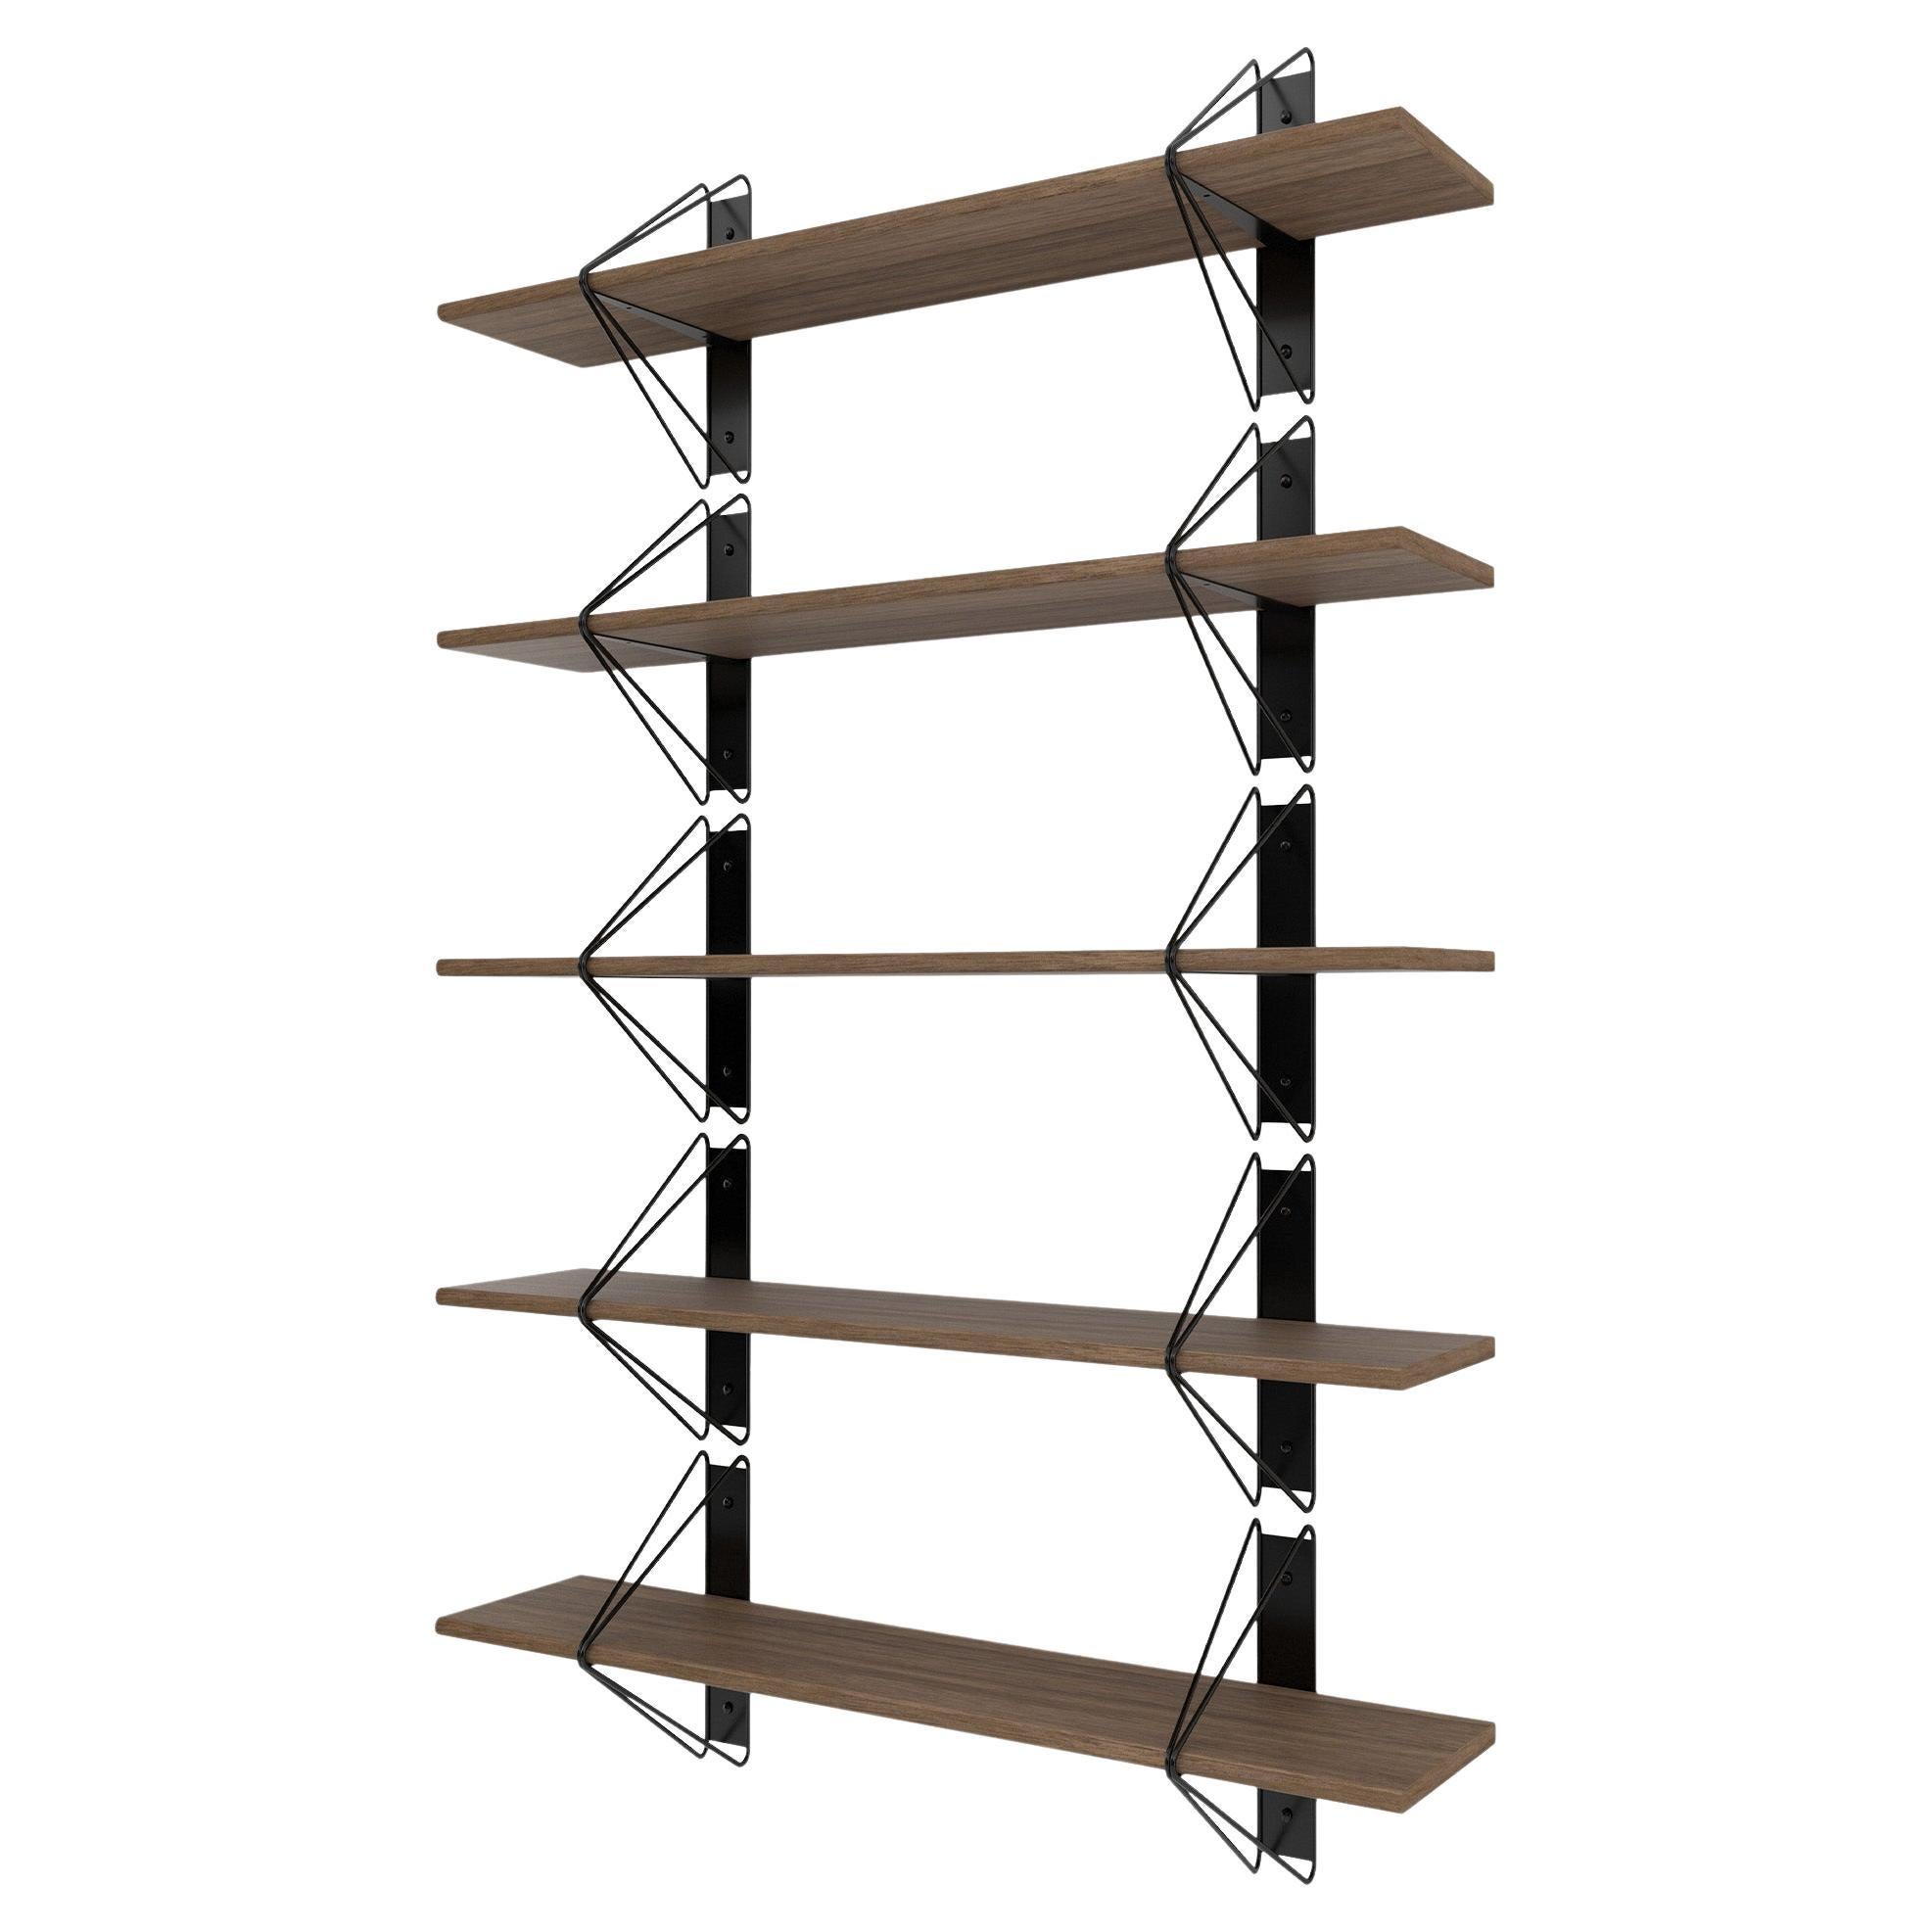 Set of 5 Strut Shelves from Souda, 52in, Black and Walnut, Made to Order For Sale